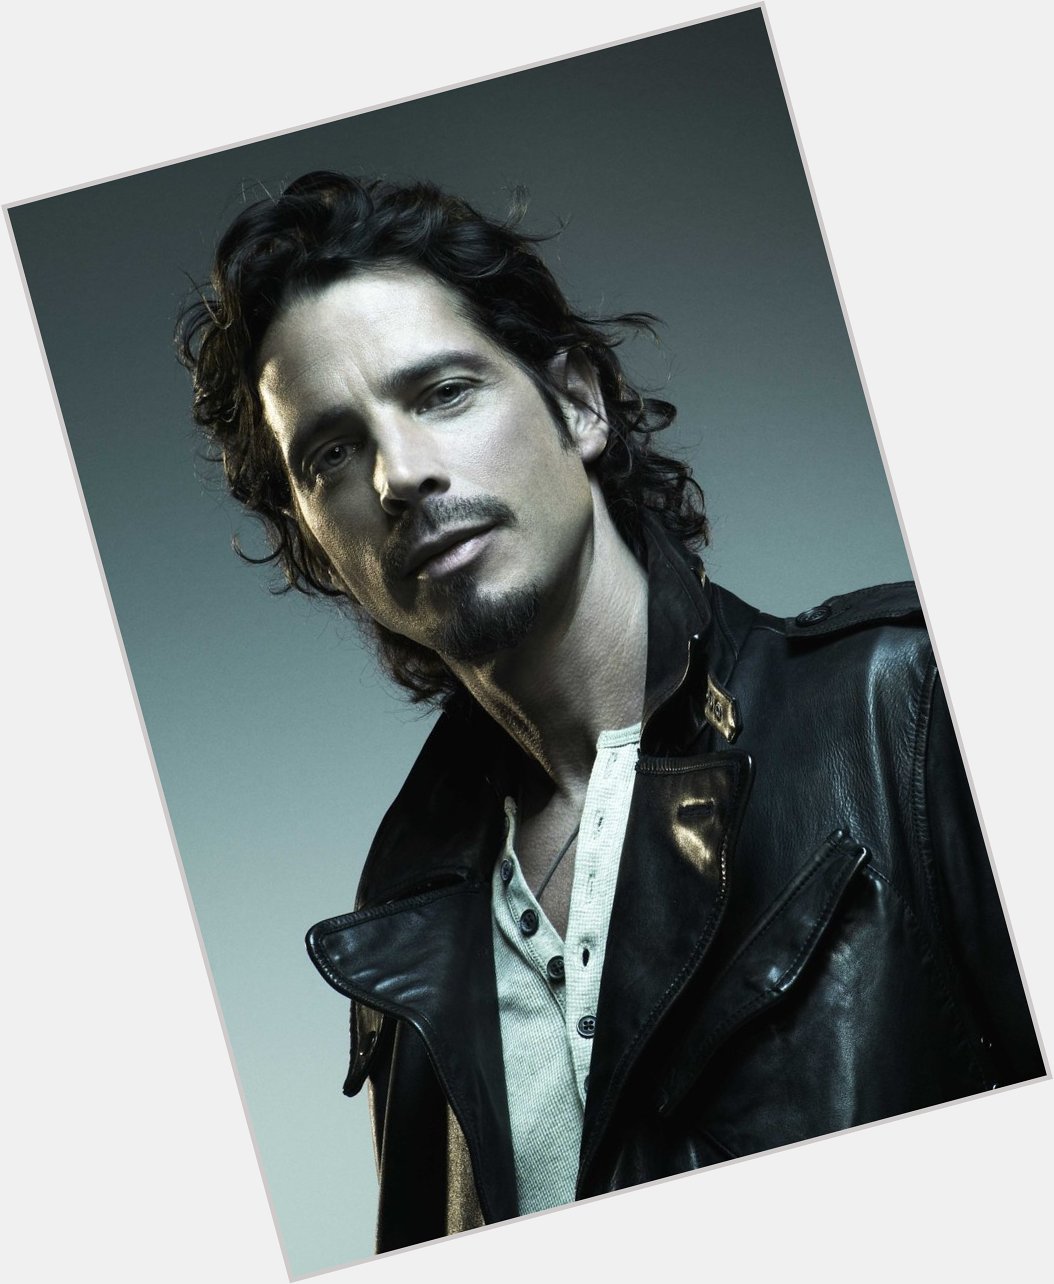 HAPPY BIRTHDAY TO THE LATE CHRIS CORNELL WHO WOULD\VE TURNED 58 TODAY. 